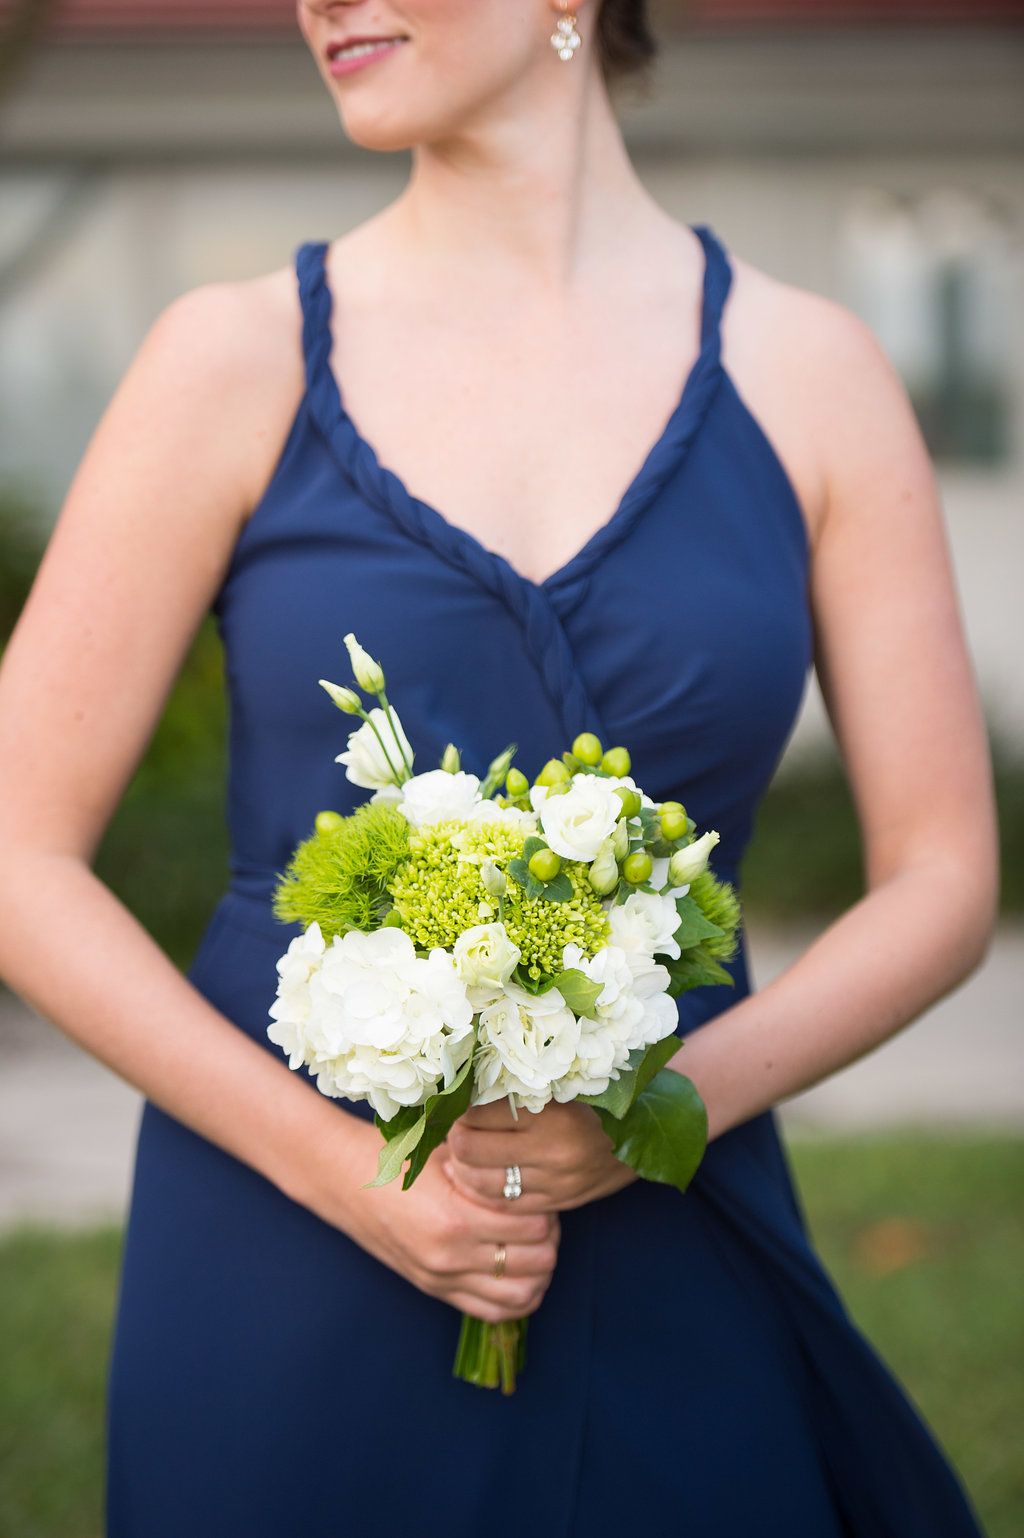 Bridesmaid in Navy Blue Bridesmaid Dress Holding Bouquet with Greenery and White Hydrangeas | Bella Bridesmaids, Joanna August